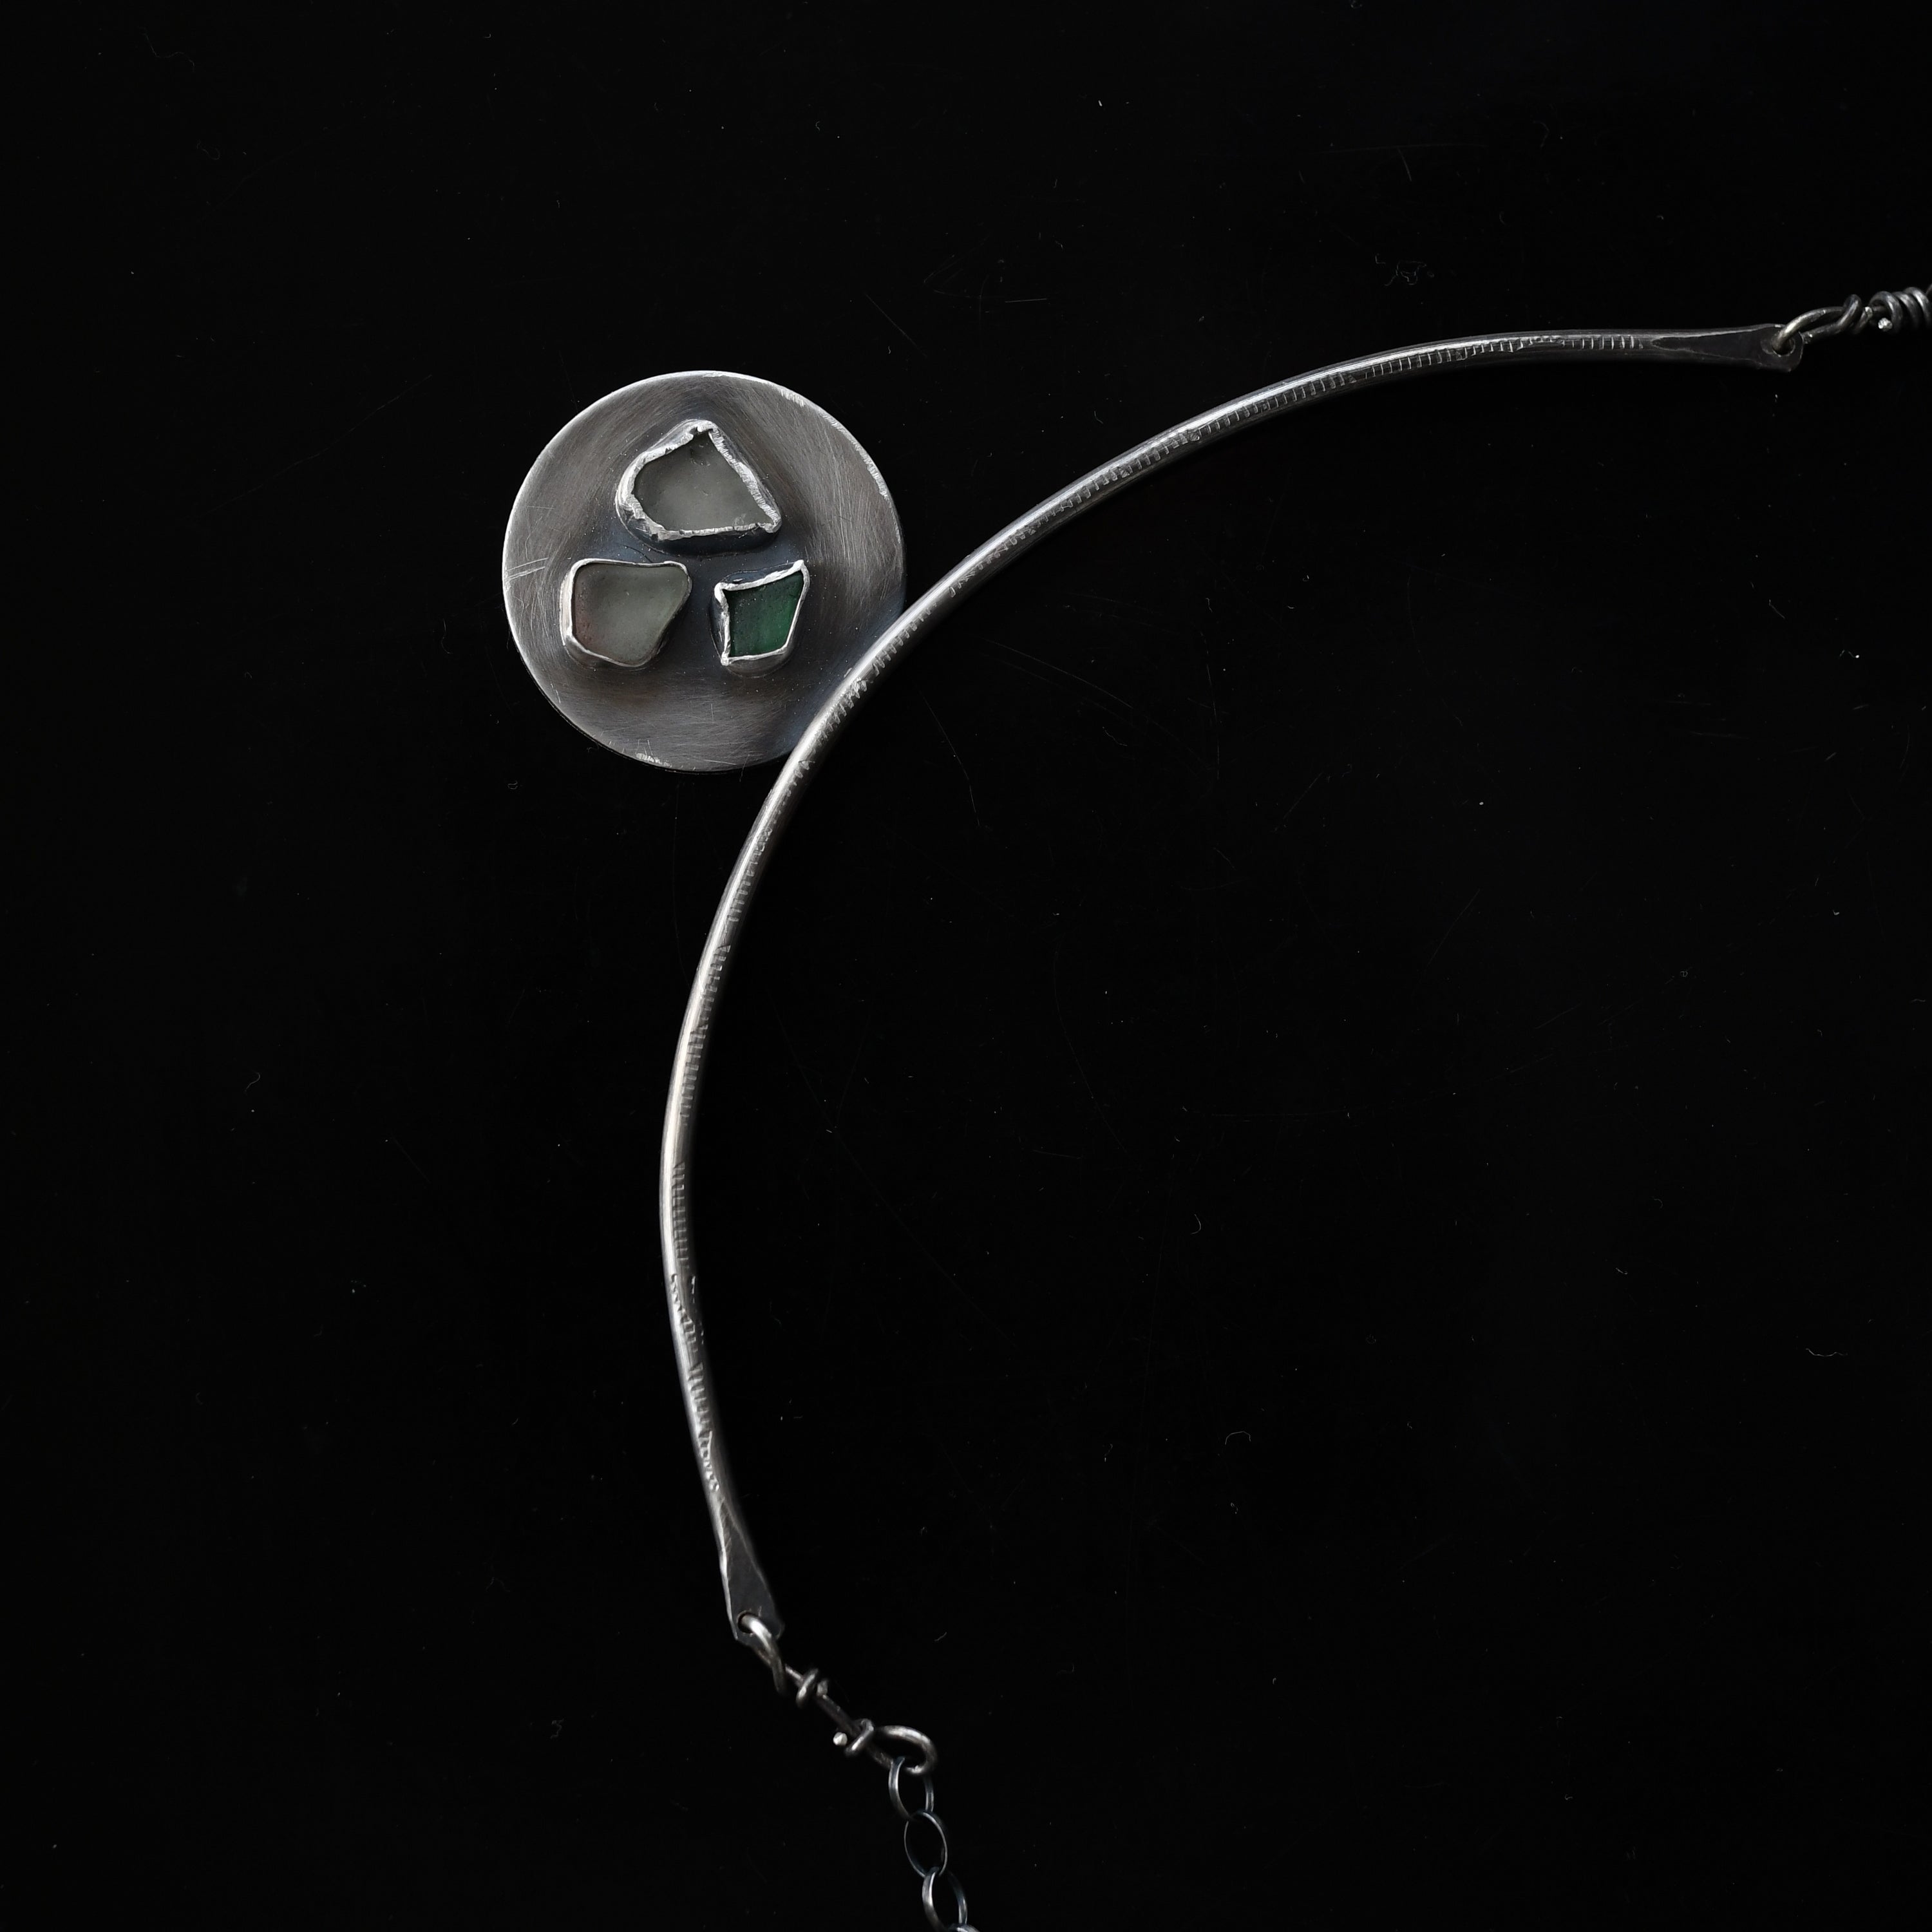 Rockpools in moonlight sea glass and silver necklace